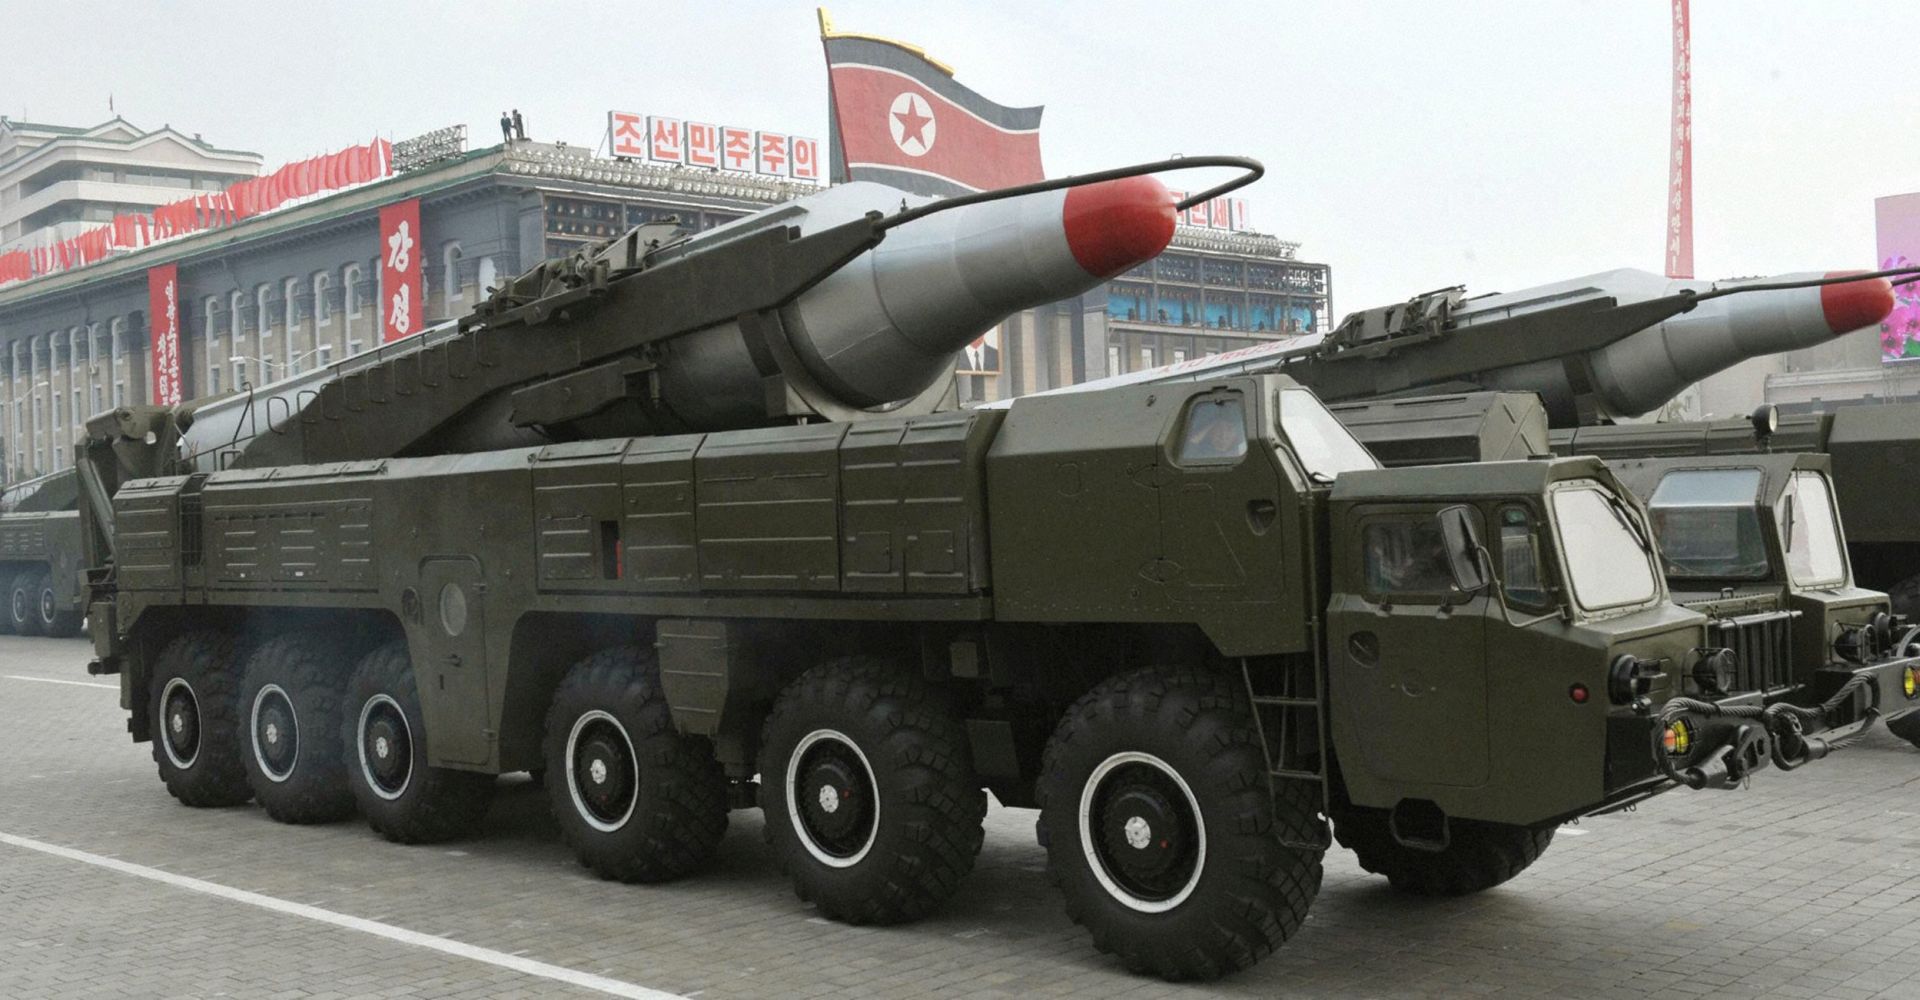 epa05338010 (FILE) A file photo dated October 2010 and made available by the North Korean Central News Agency (KCNA) shows a 'Musudan' missile displayed during a military parade marking the 65th anniversary of the foundation of the Workers' Party of Korea, in Pyongyang, North Korea. North Korea unsuccessfully launched on 31 May 2016, a medium-range ballistic missile, according to a military source from Seoul. 'North Korea attempted to launch an unidentified missile from the region near Wonsan at around 05:20 local time (20:20 GMT on 31 May 2016), but it is presumed to have been unsuccessful,' said the South Korean Joint Chiefs of Staff (JCS) in a short statement quoted by South Korean media. The South Korean Army is on alert and studying details of the launch which could be a Musudan medium-range ballistic missile. The latest incident comes at a moment of great tension in the Korean peninsula after North Korea's nuclear and missile tests early this year, resulting in the UN Security Council imposing tough sanctions on the country in March.  EPA/KCNA SOUTH KOREA OUT  EDITORIAL USE ONLY